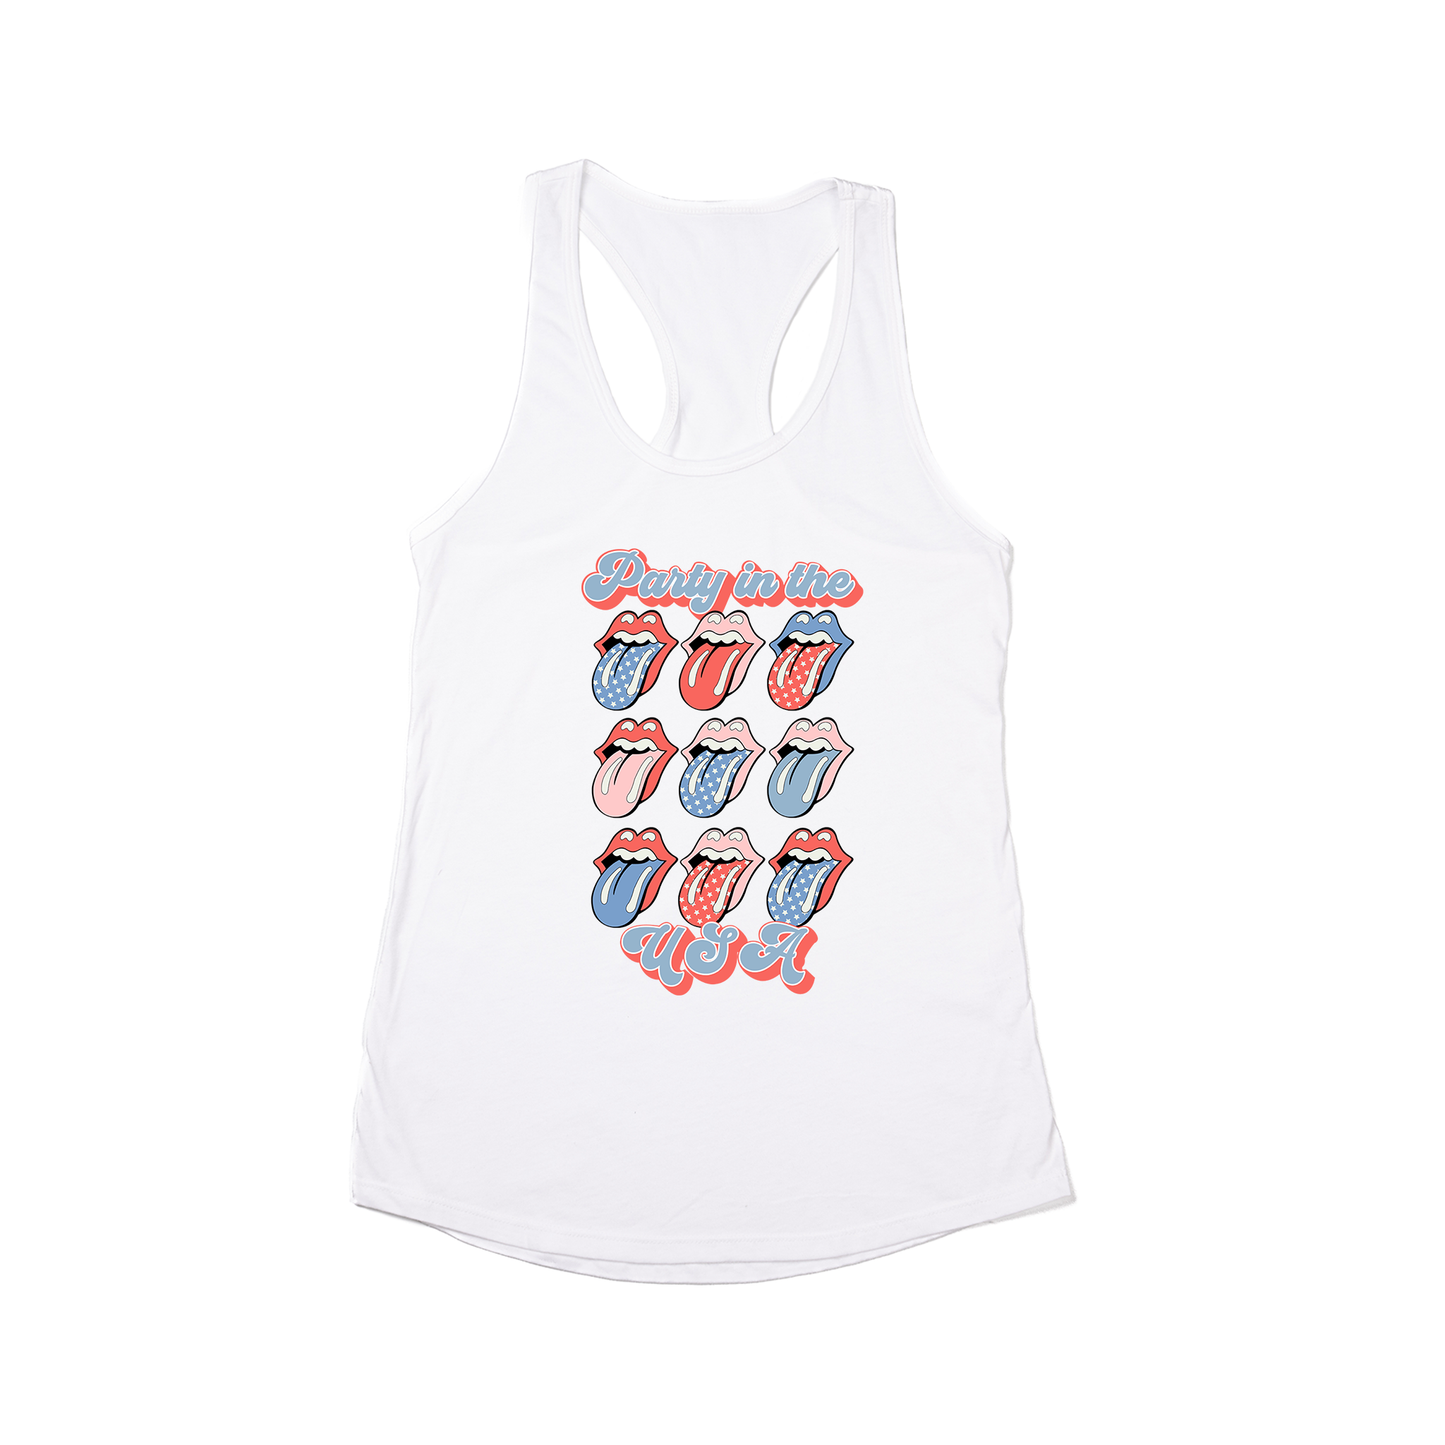 Party in the USA - Women's Racerback Tank Top (White)